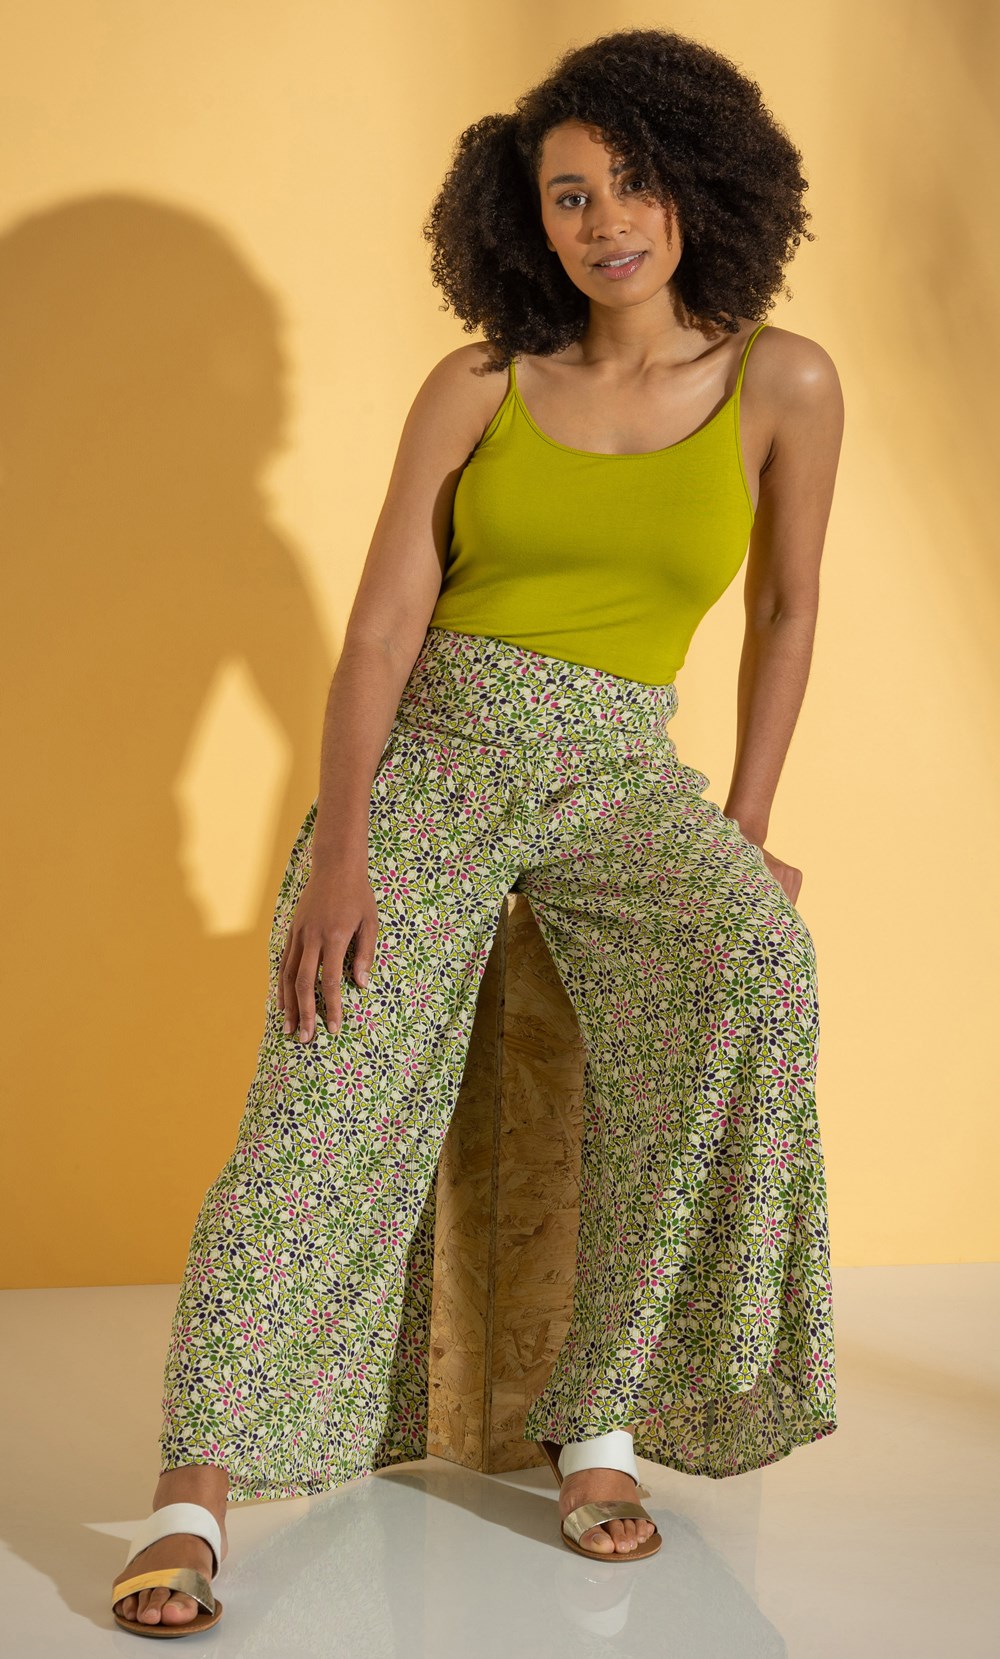 Printed Wide Leg Textured Palazzo Trousers